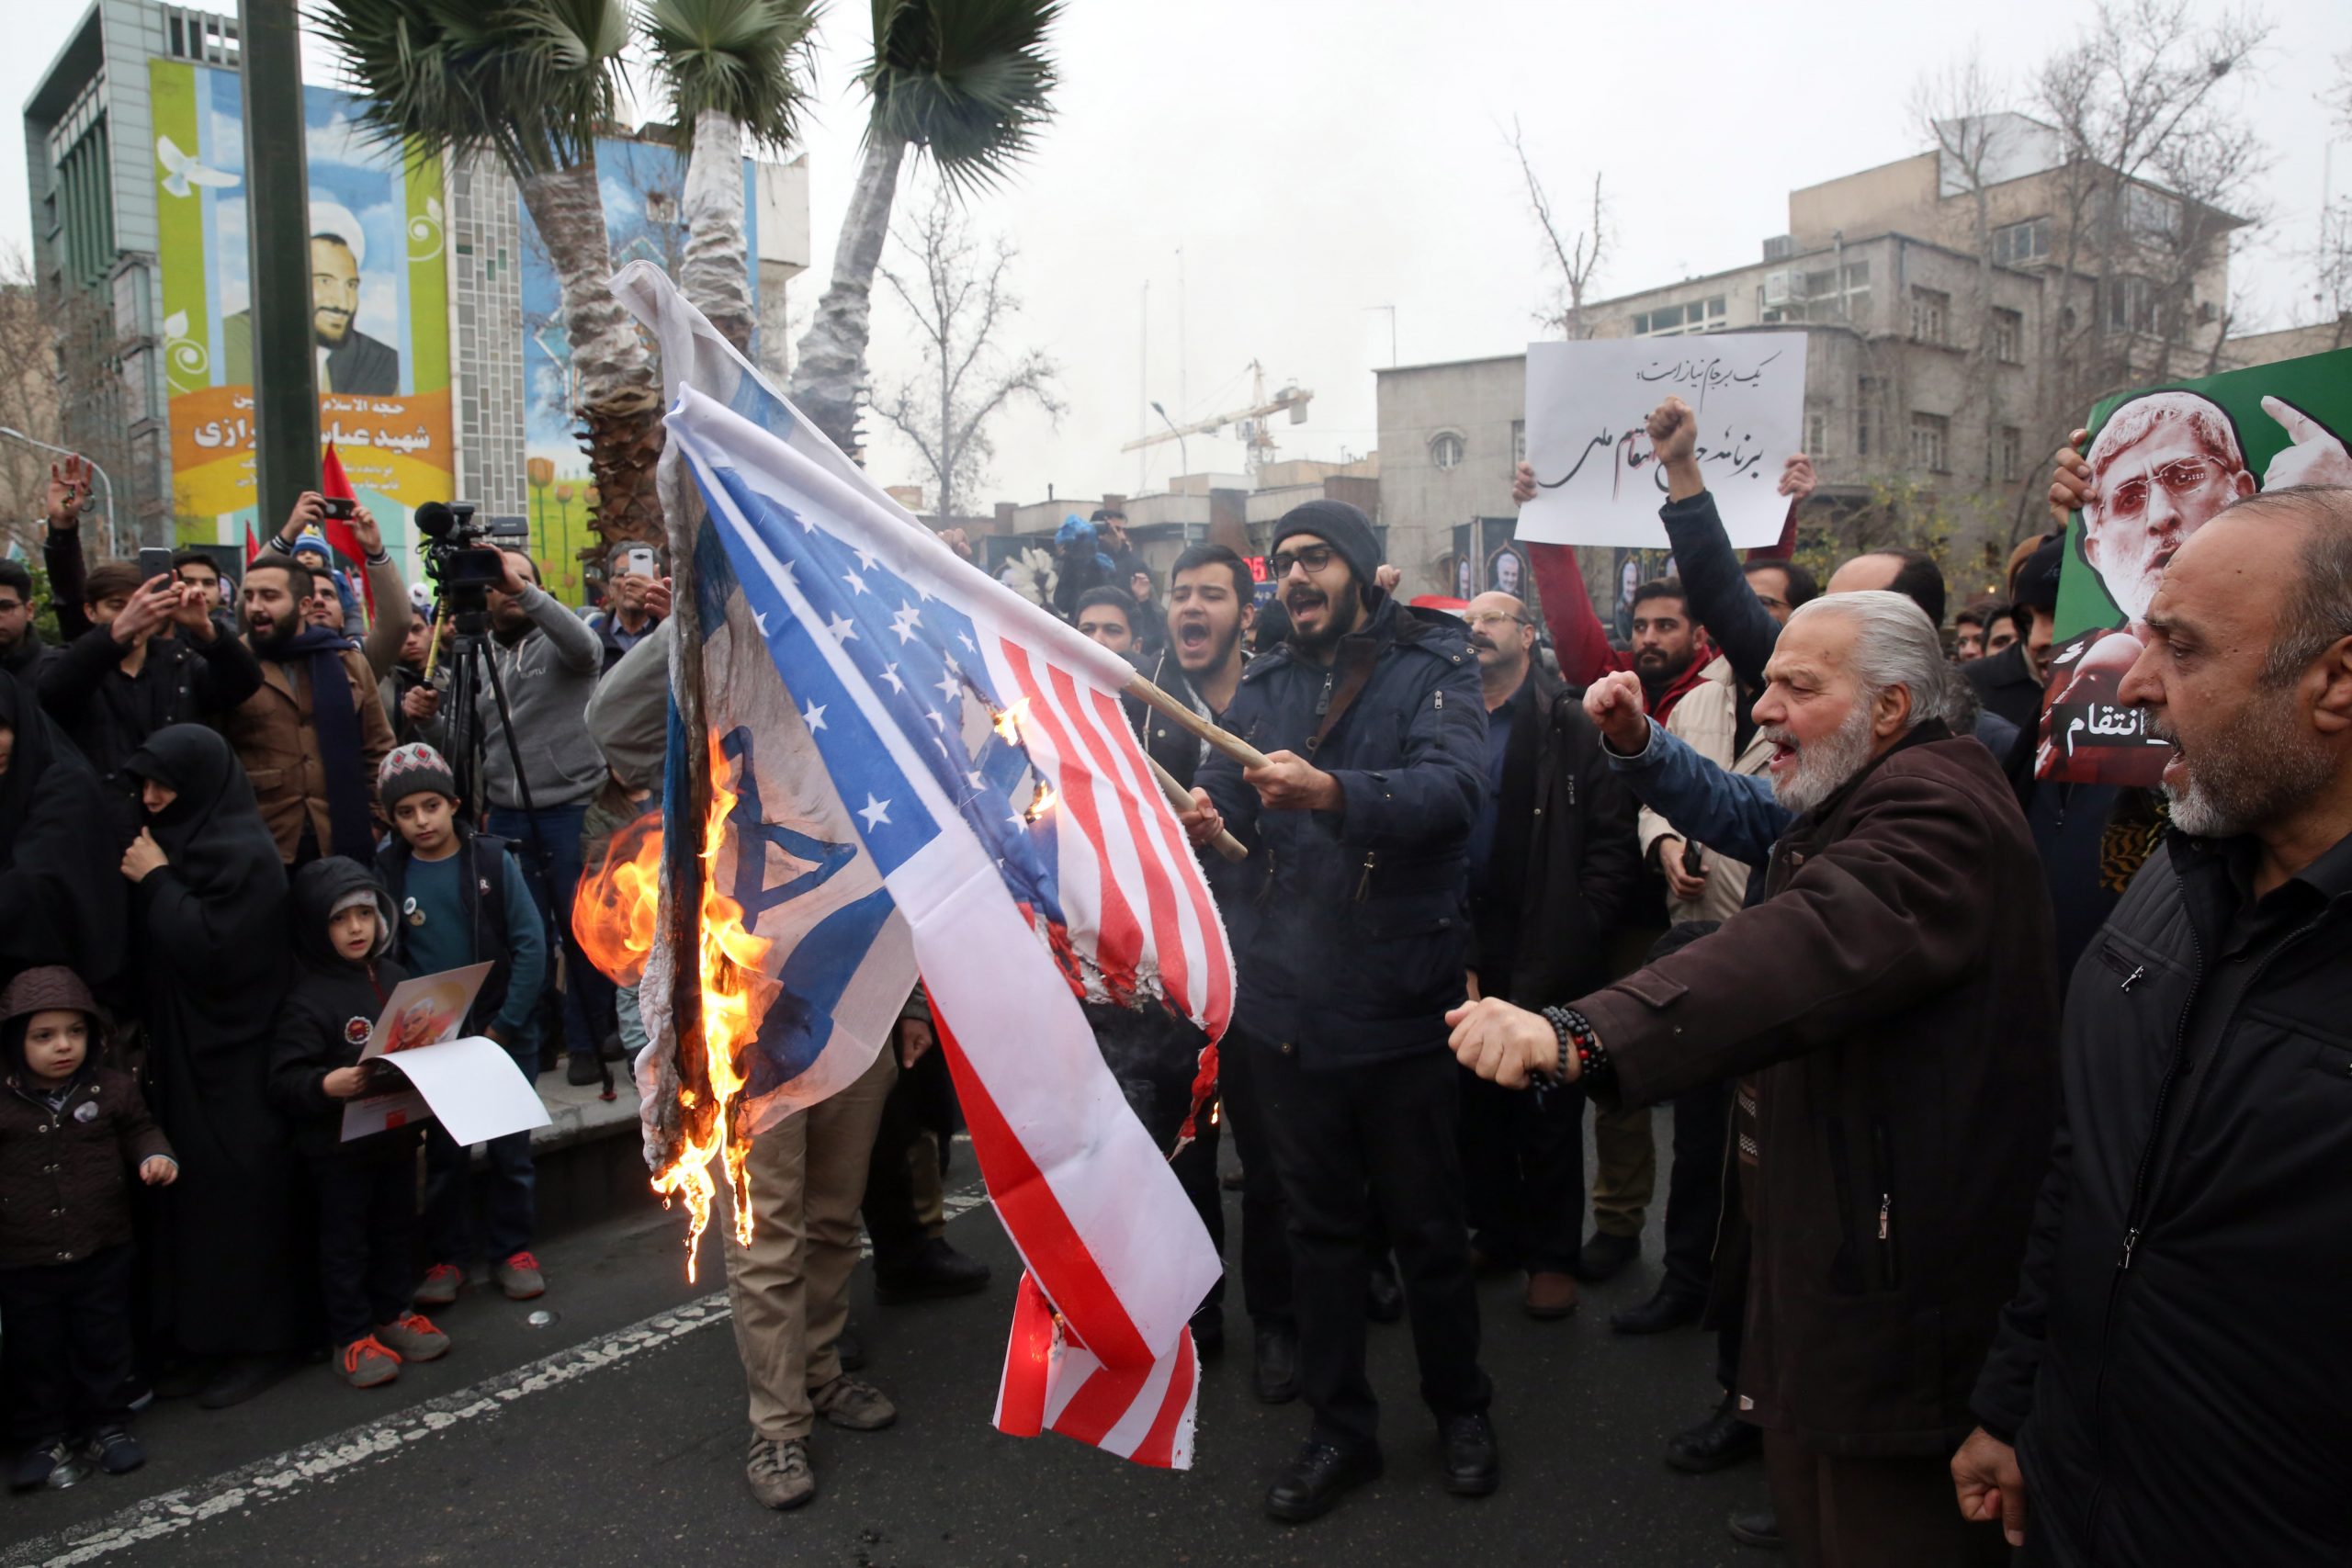 epa08102256 
Iranians burn US and Israel flags during anti-US protests over killing late Iranian Revolutionary Guards Corps (IRGC) Lieutenant general and commander of the Quds Force Qasem Soleimani  in Tehran, Iran, 04 January 2020. The Pentagon announced that Iran's Quds Force leader Qasem Soleimani and Iraqi militia commander Abu Mahdi al-Muhandis were killed on 03 January 2020 following a US airstrike at Baghdad's international airport. The attack comes amid escalating tensions between Tehran and Washington  EPA/ABEDIN TAHERKENAREH